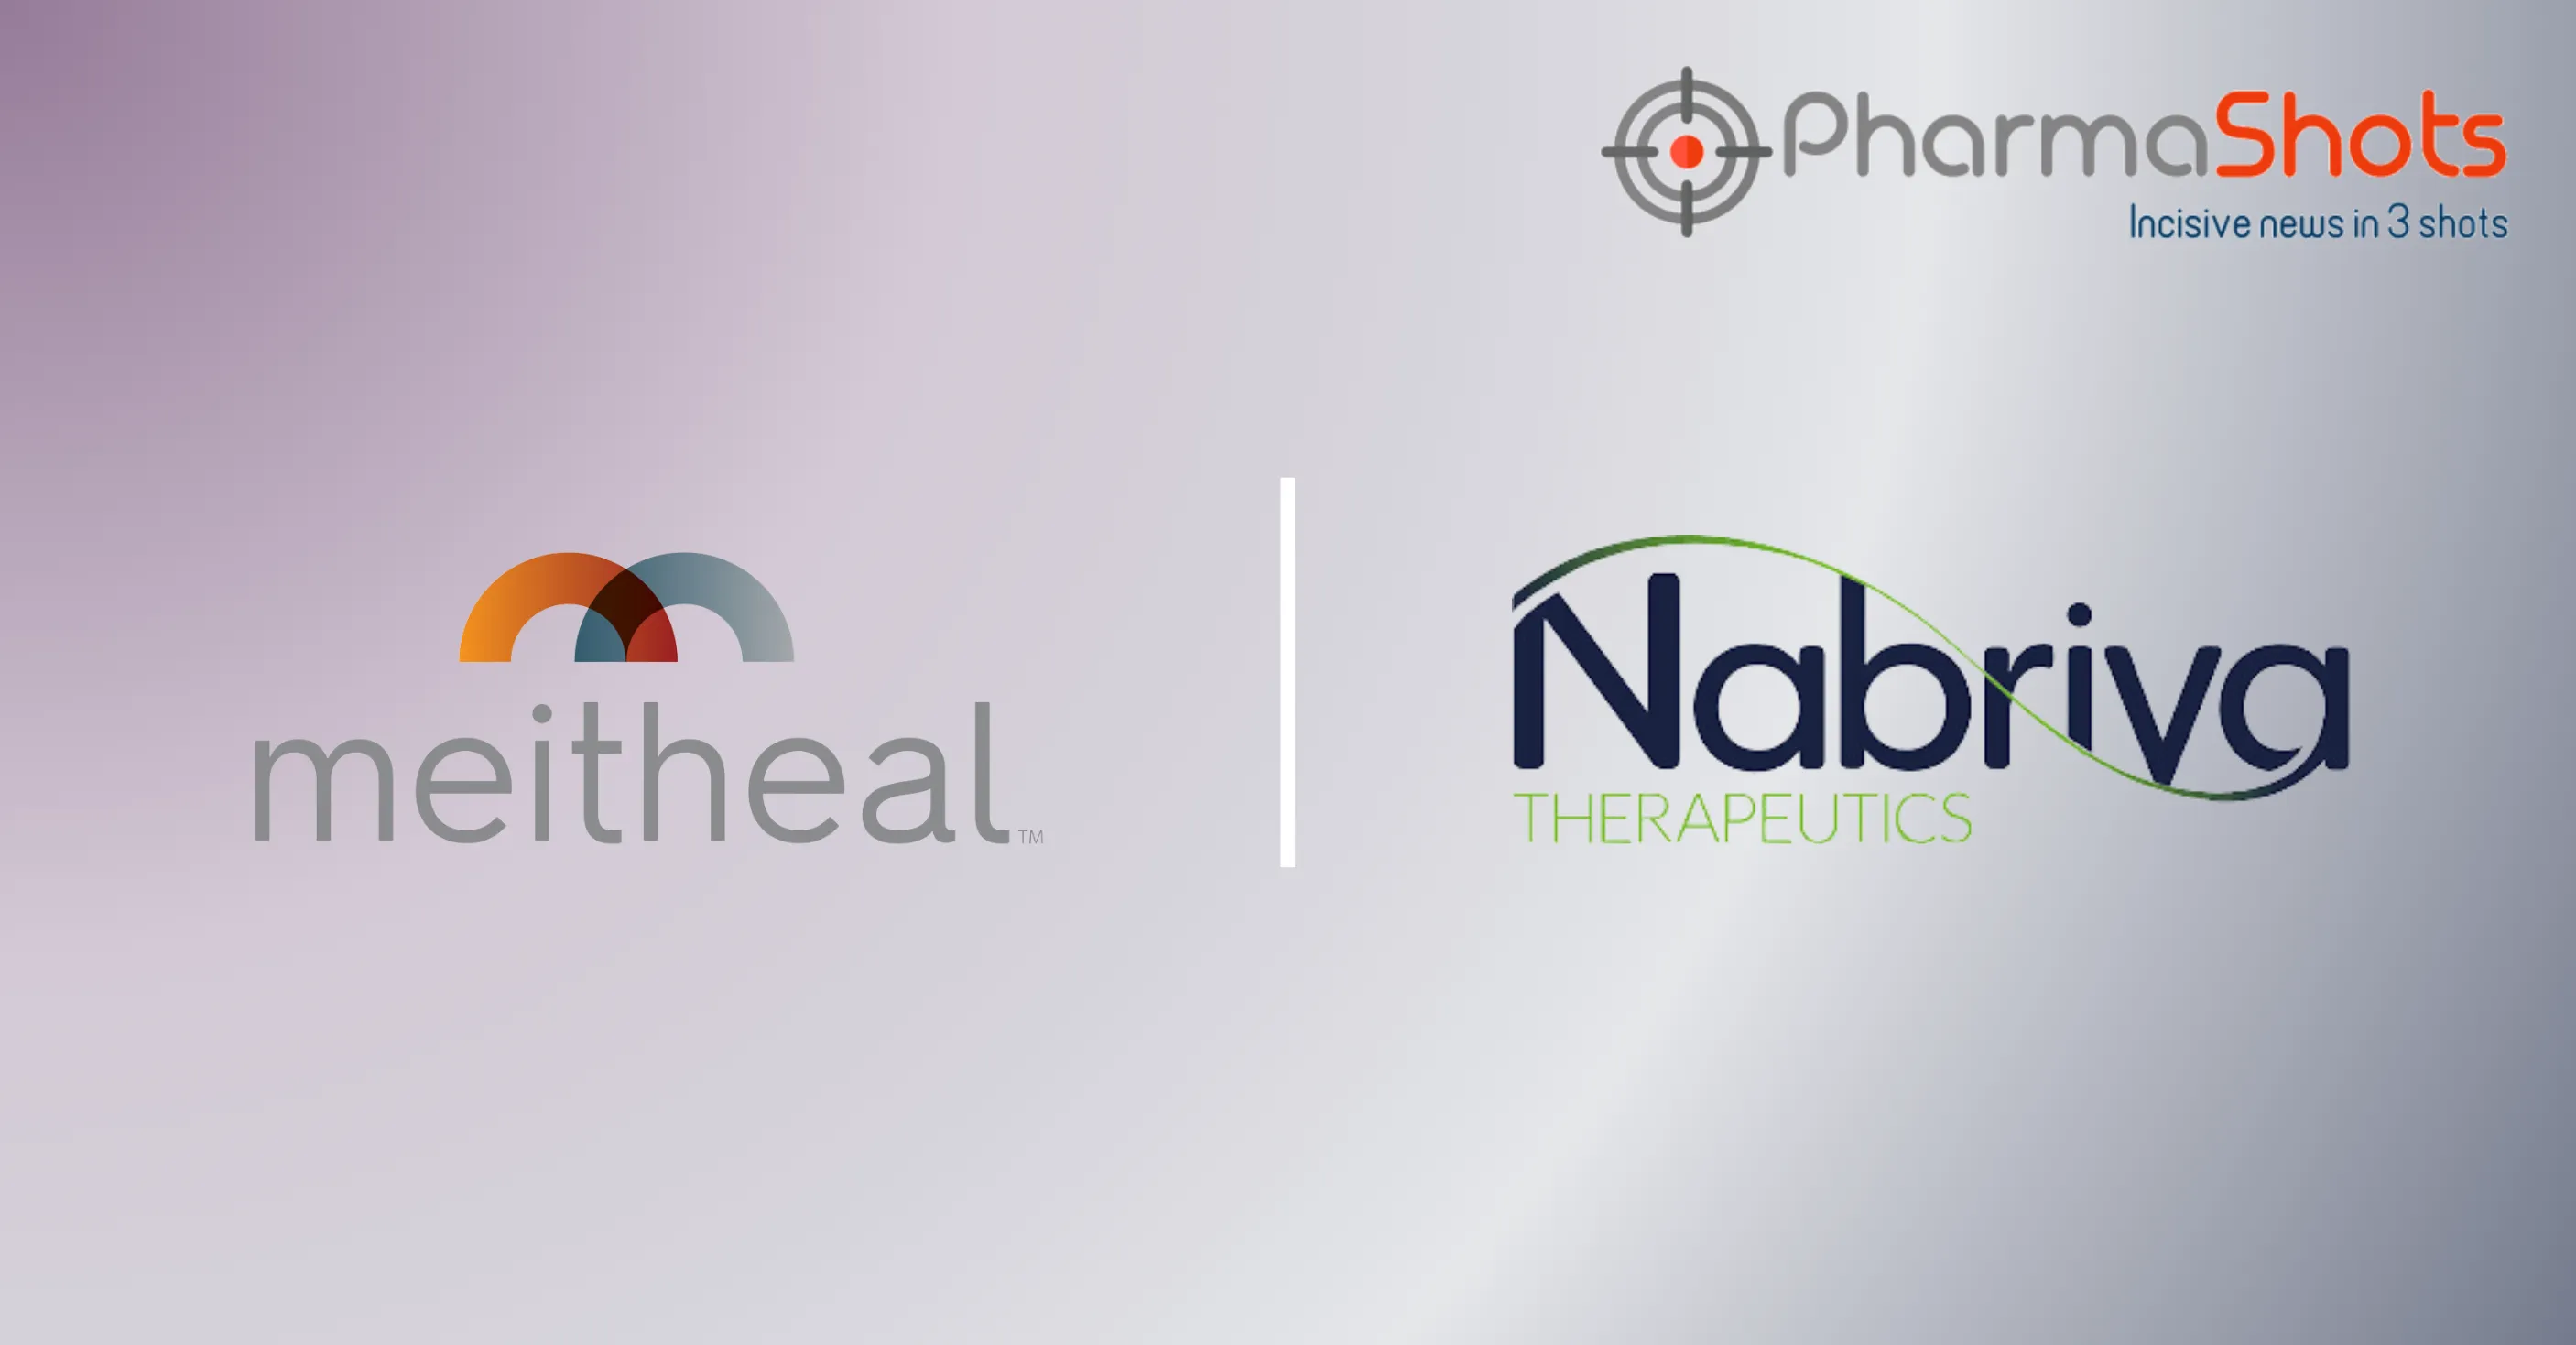 Meitheal Acquires Rights of Nabriva’s Contepo, Expanding its Specialty Biopharmaceuticals Portfolio